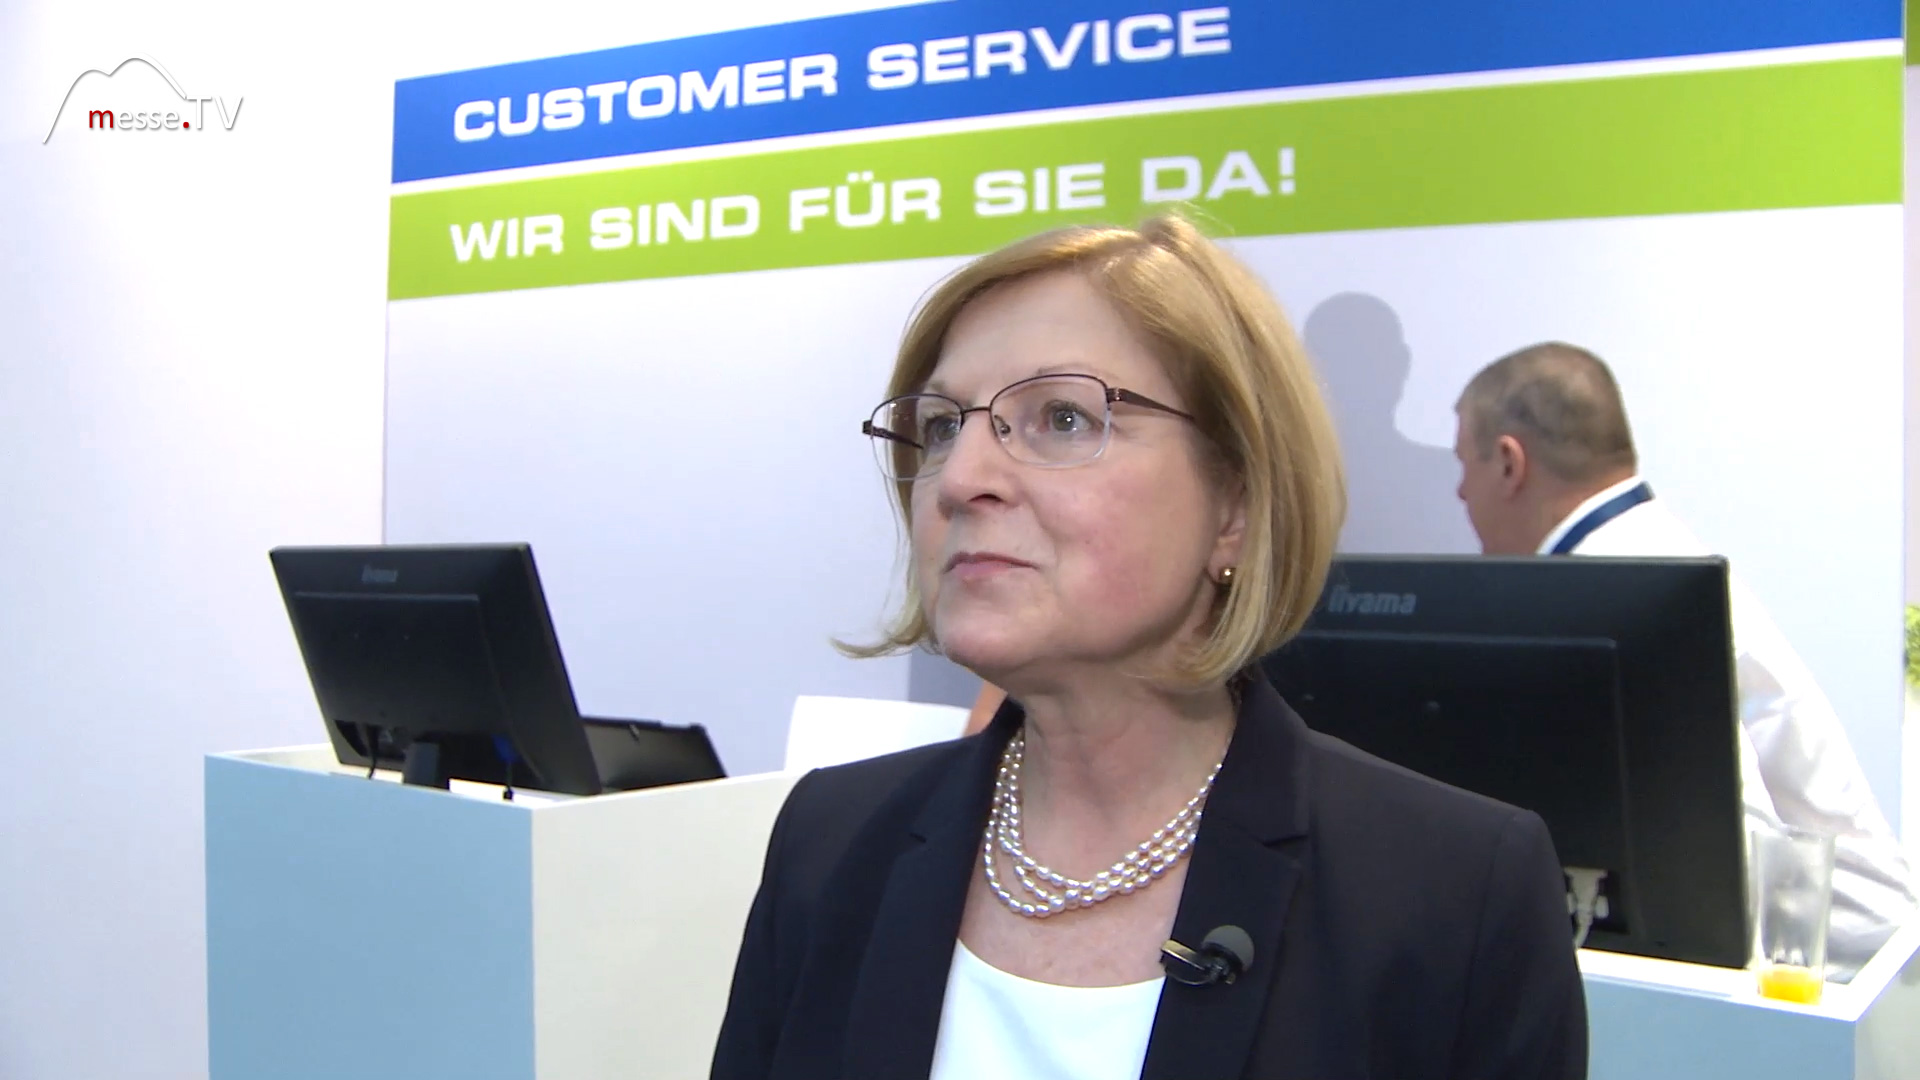 TOLL COLLECT Customer Service am Messestand